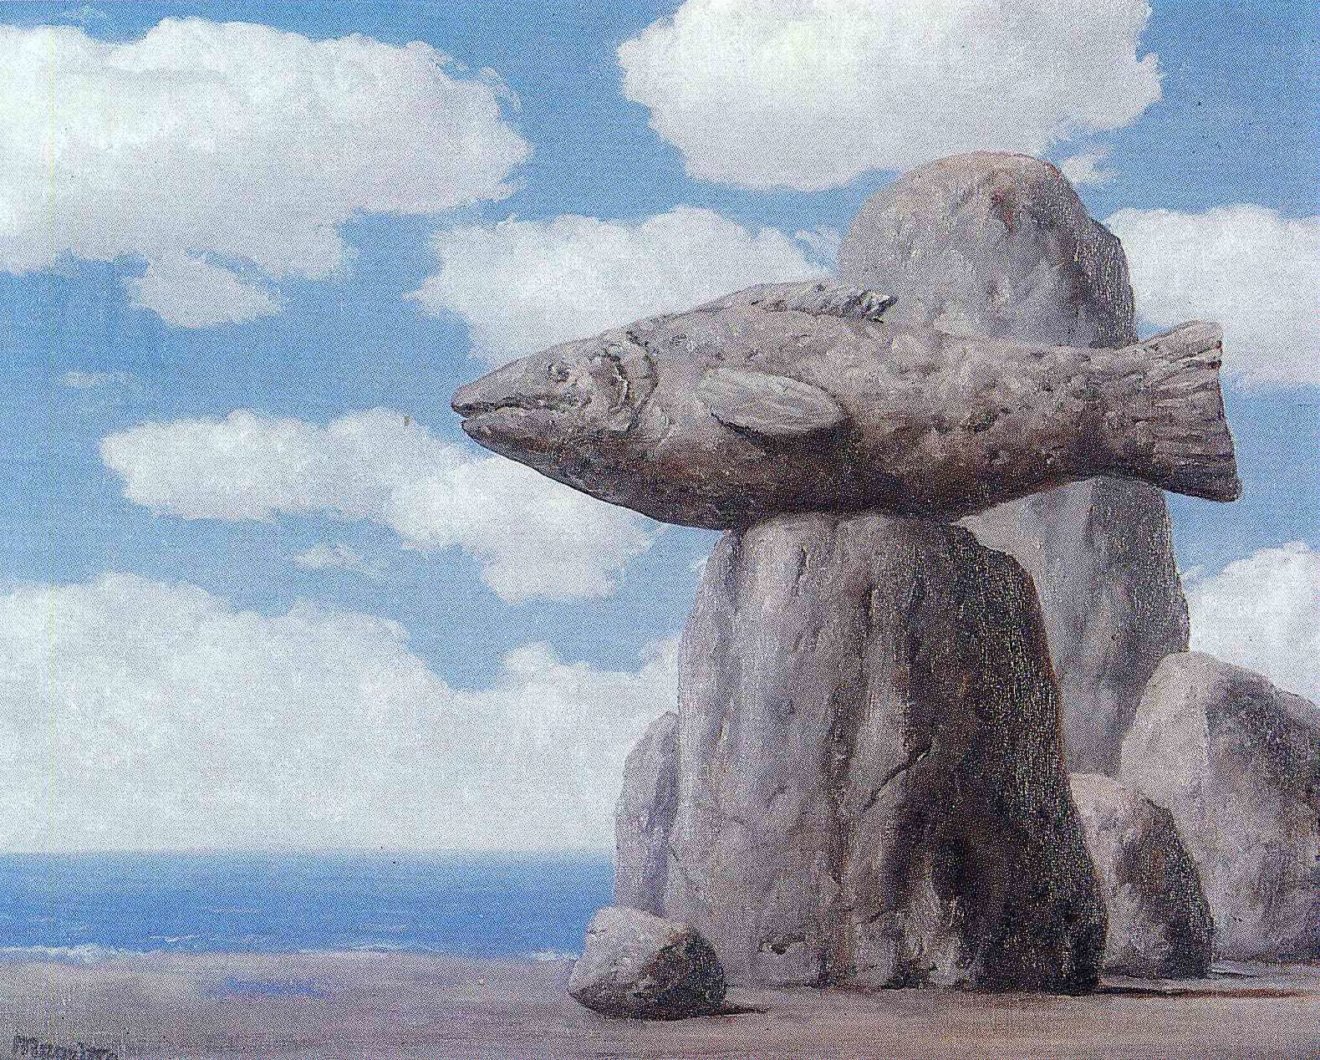 Rene Magritte, The connivance, 1965